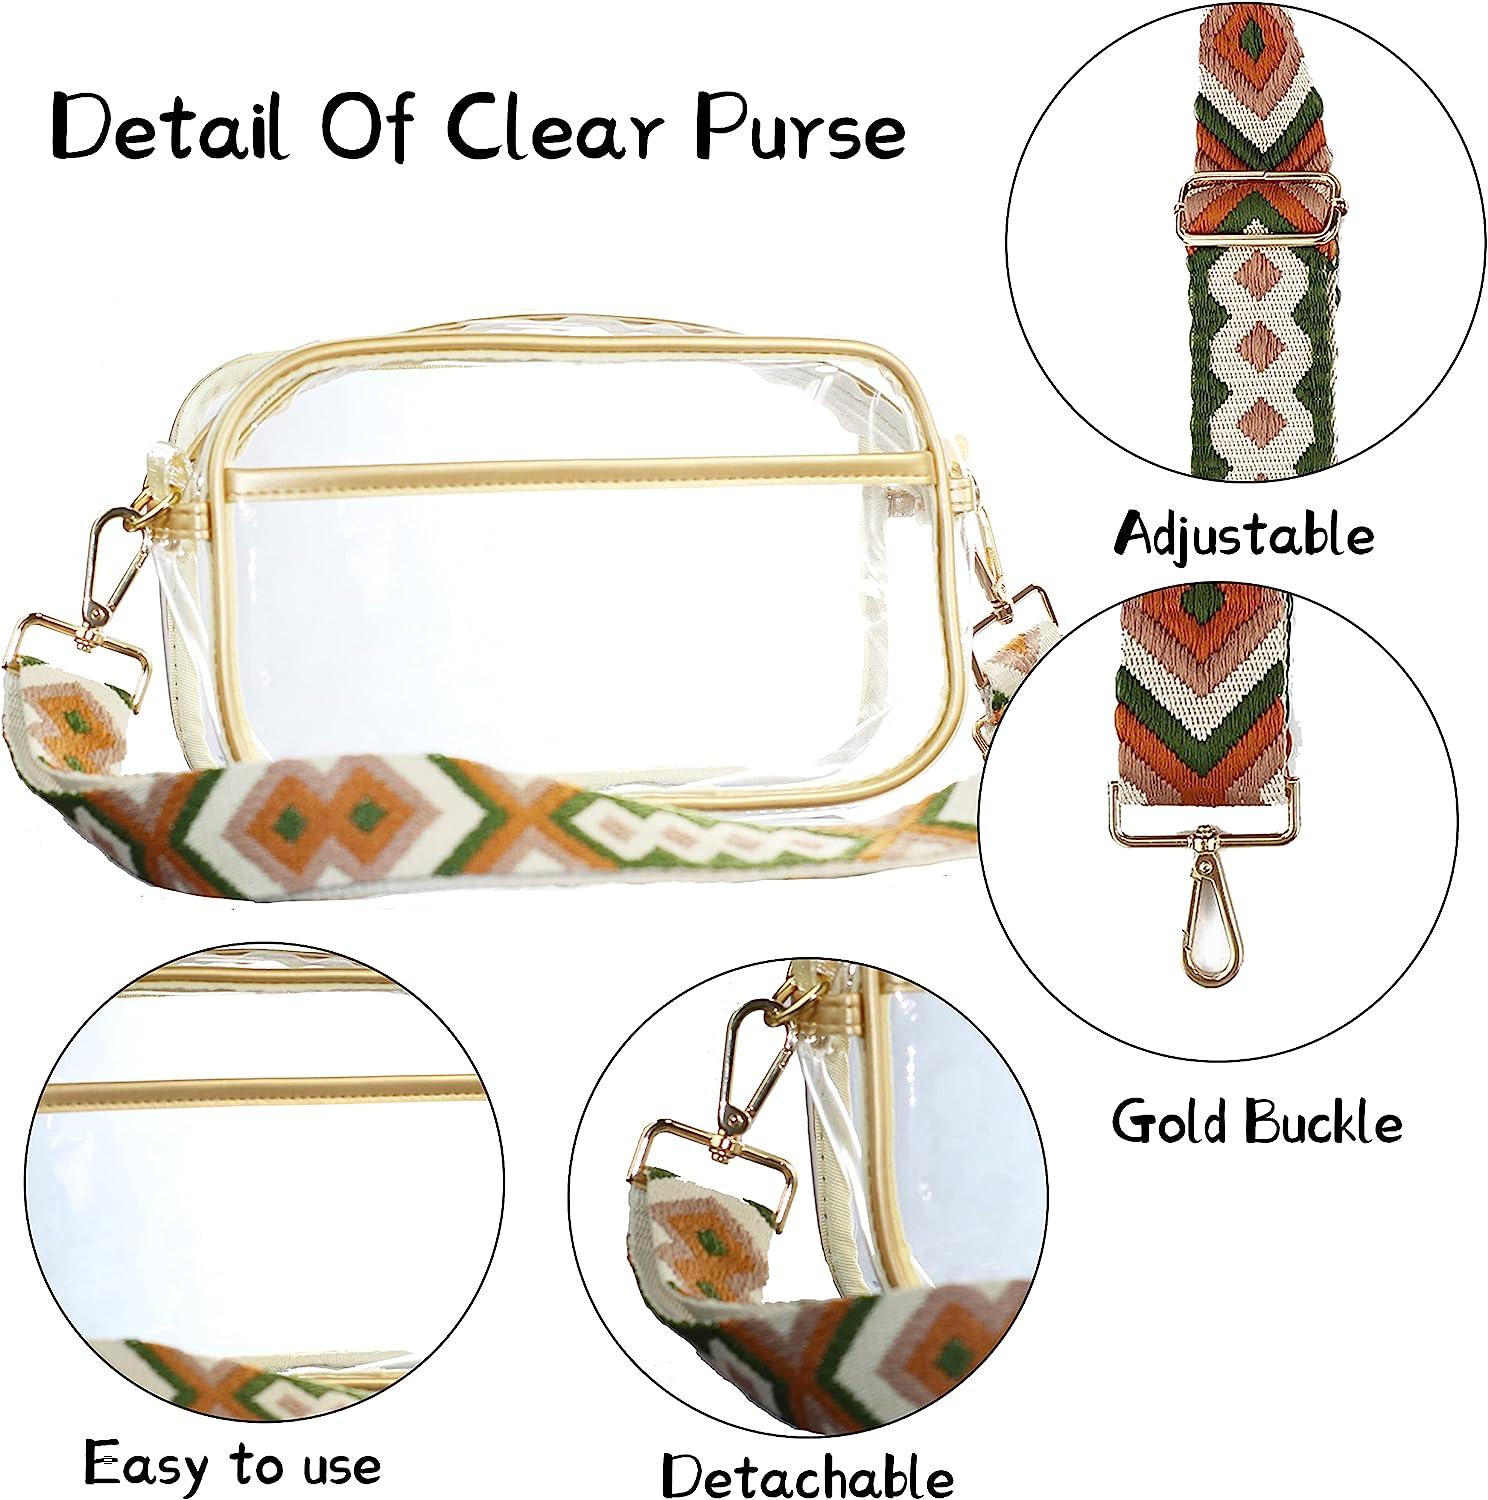 Oufegm Clear Crossbody Purse Bag for Women Stadium Approved Clear